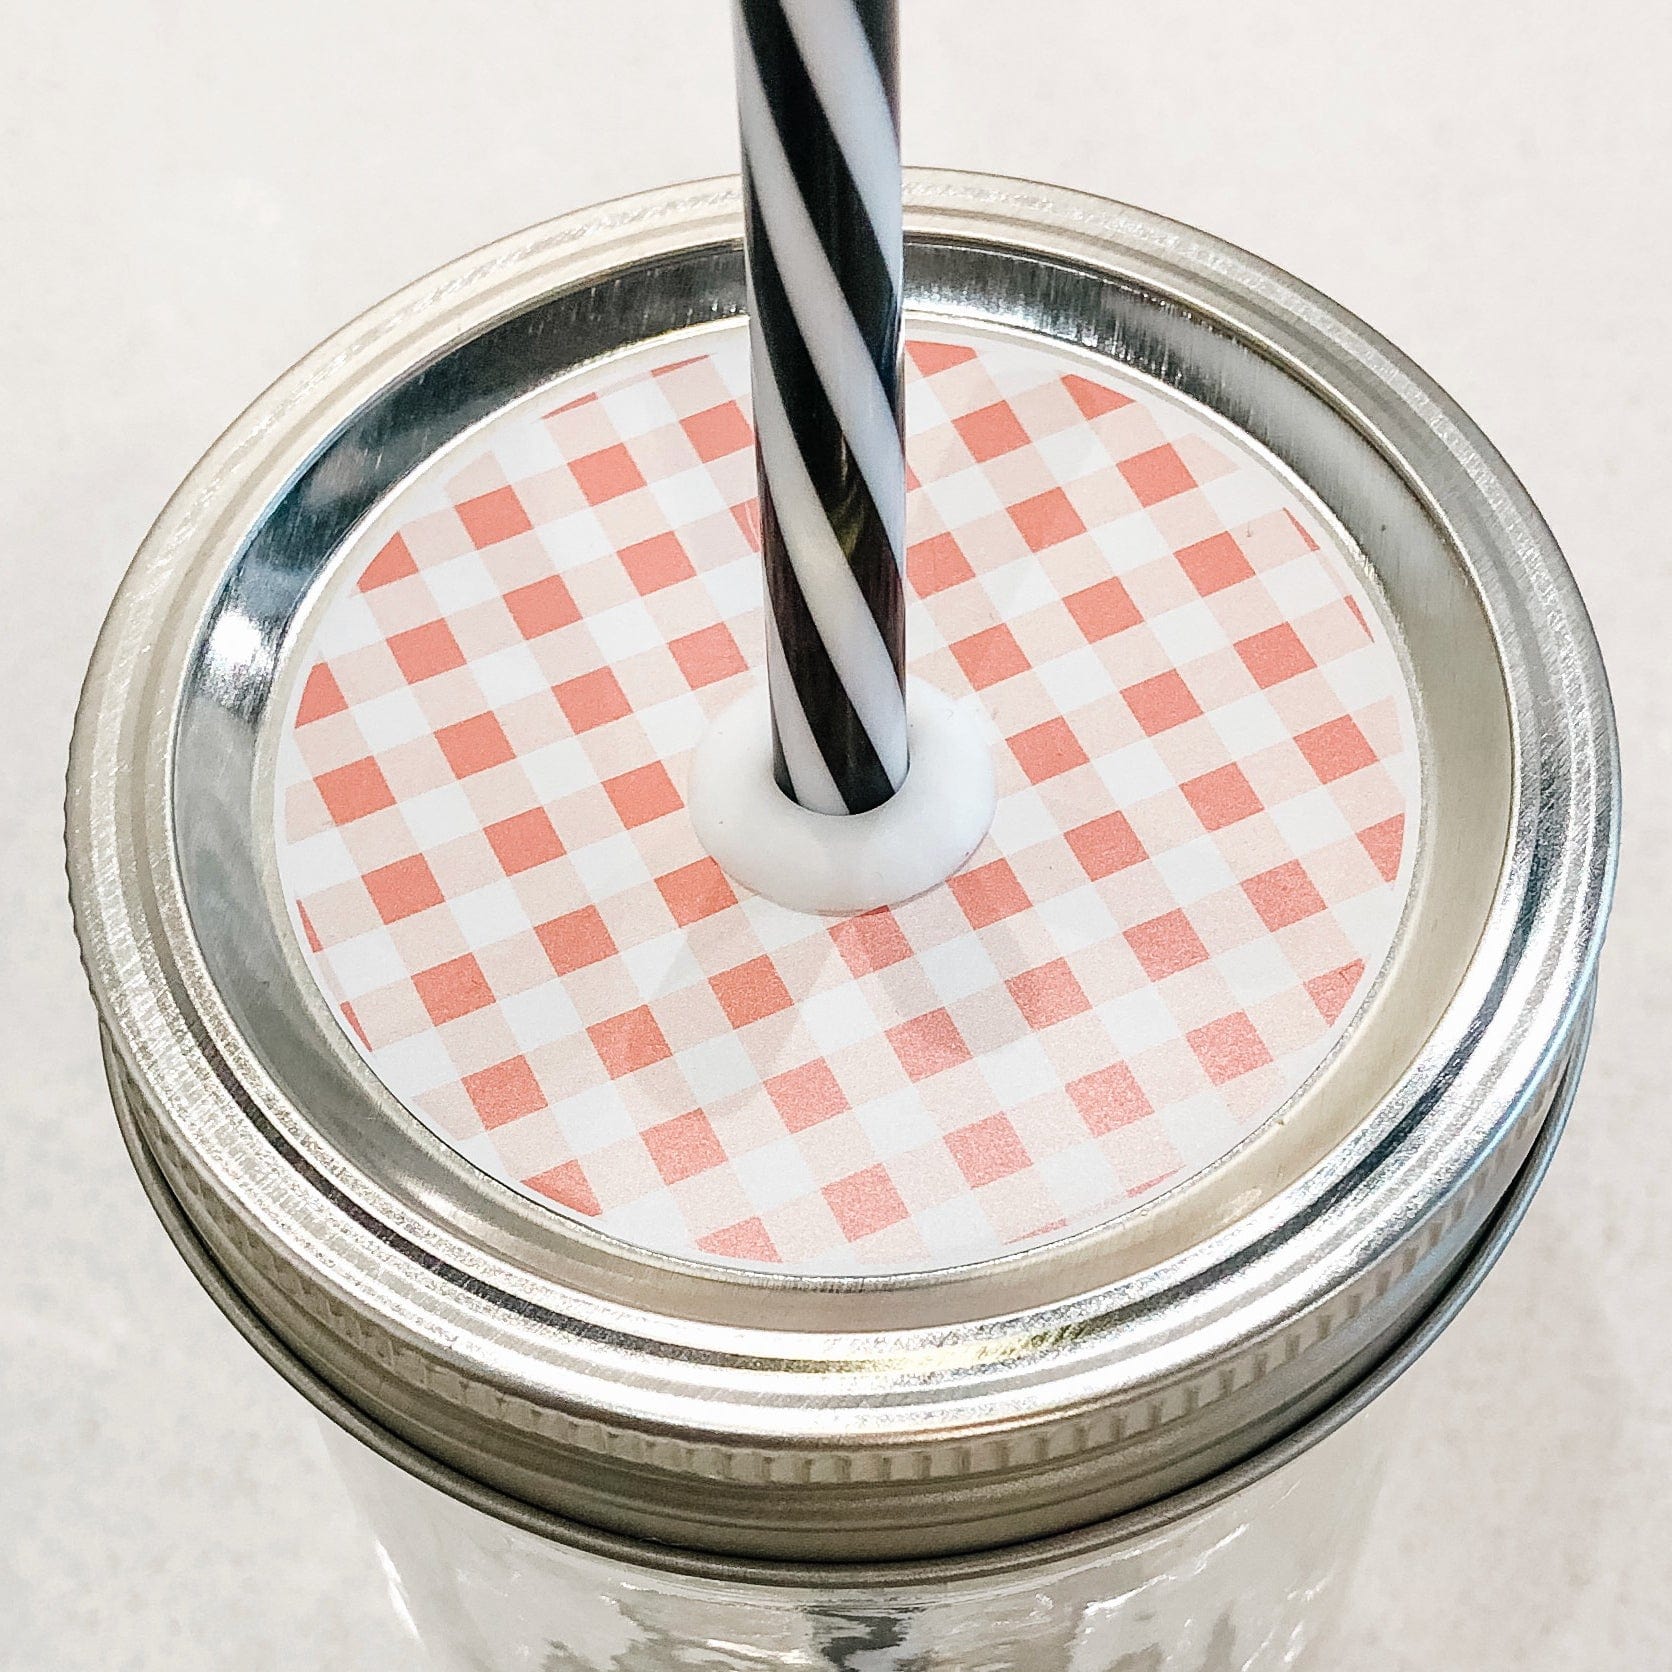 A silver lid on a regular mouth mason jar with white and peach checkered straw lid on top. It has a black and white striped straw and displayed on a white counter.